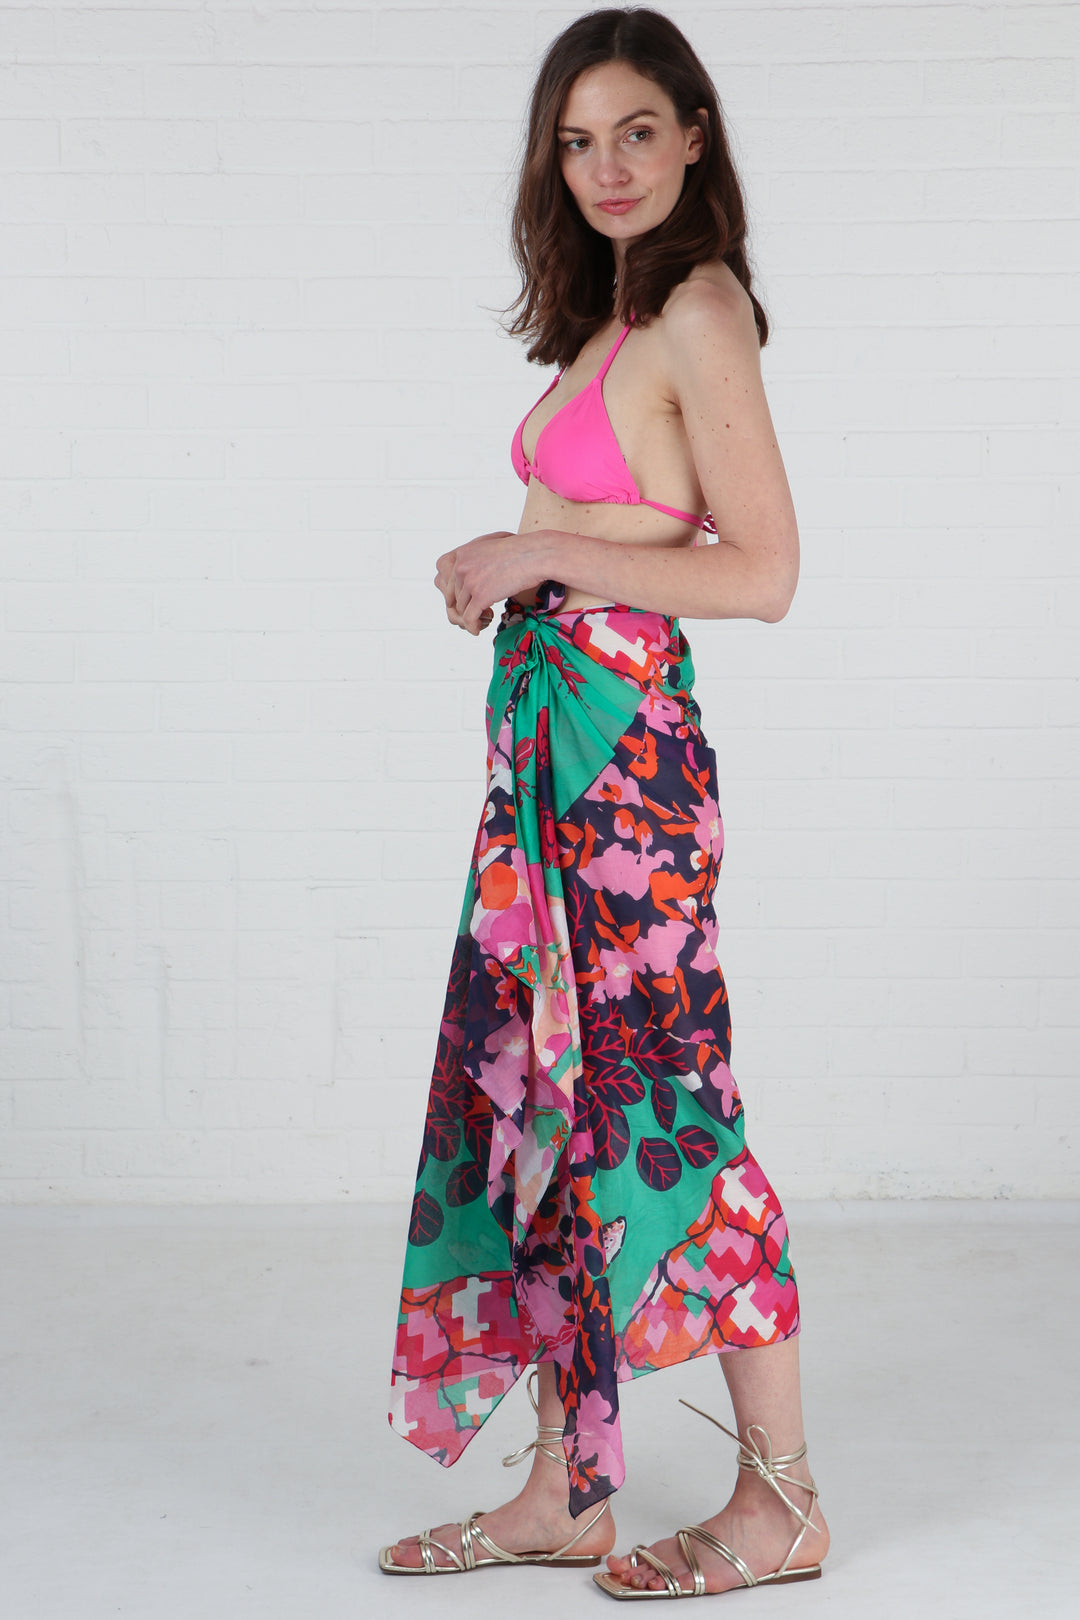 model wearing a green and pink floral bee print scarf tied around the waist to show it being worn as a beach cover up sarong